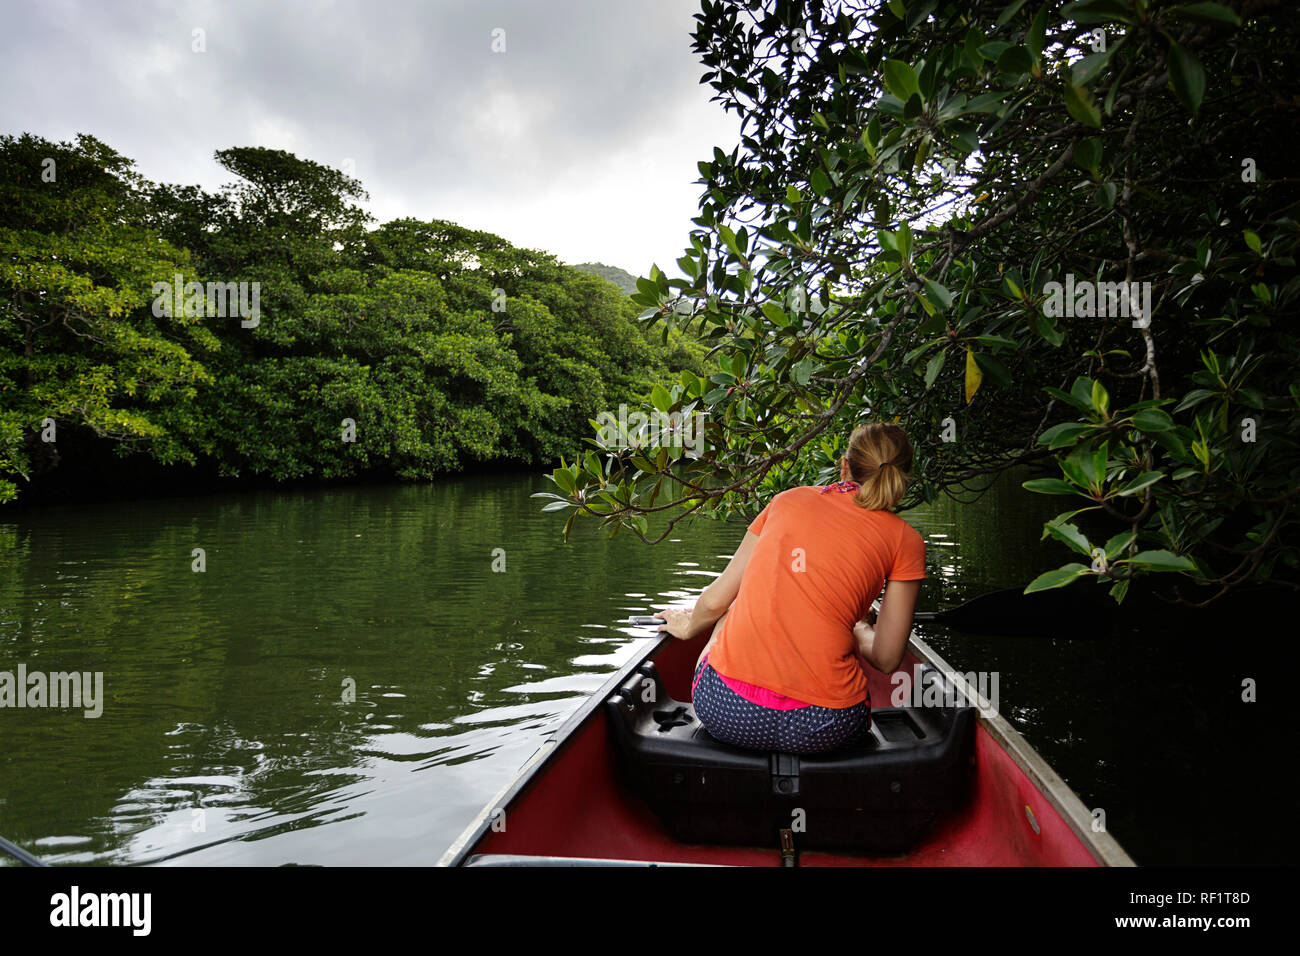 Woman canoeing on a river in mangrove forest, Iriomote, JApan Stock Photo